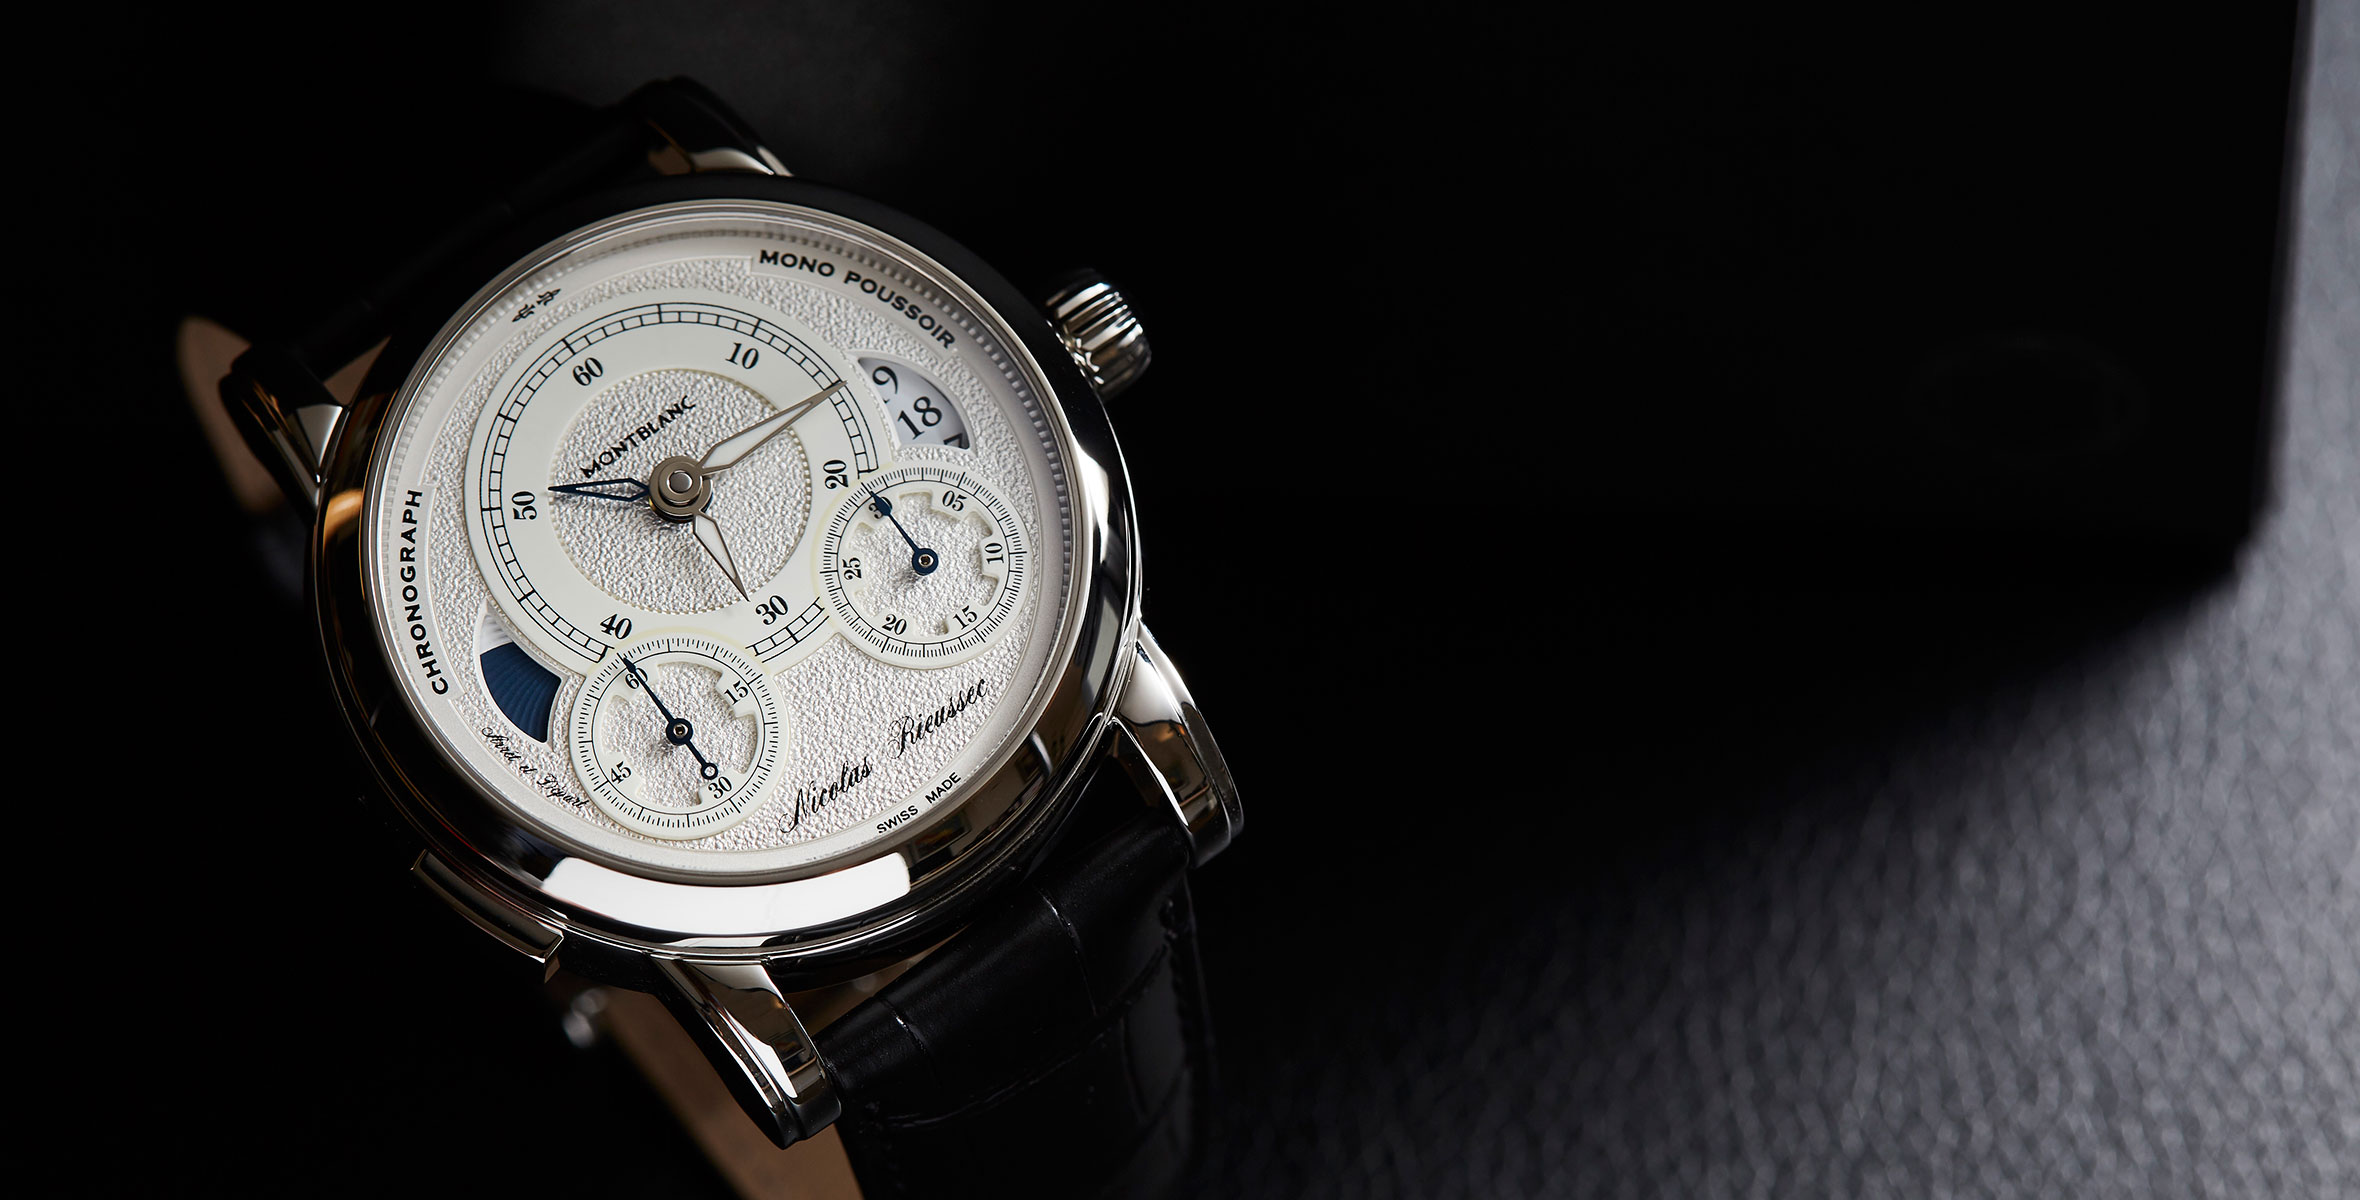 Review The Montblanc Homage to Nicolas Rieussec II Limited Edition